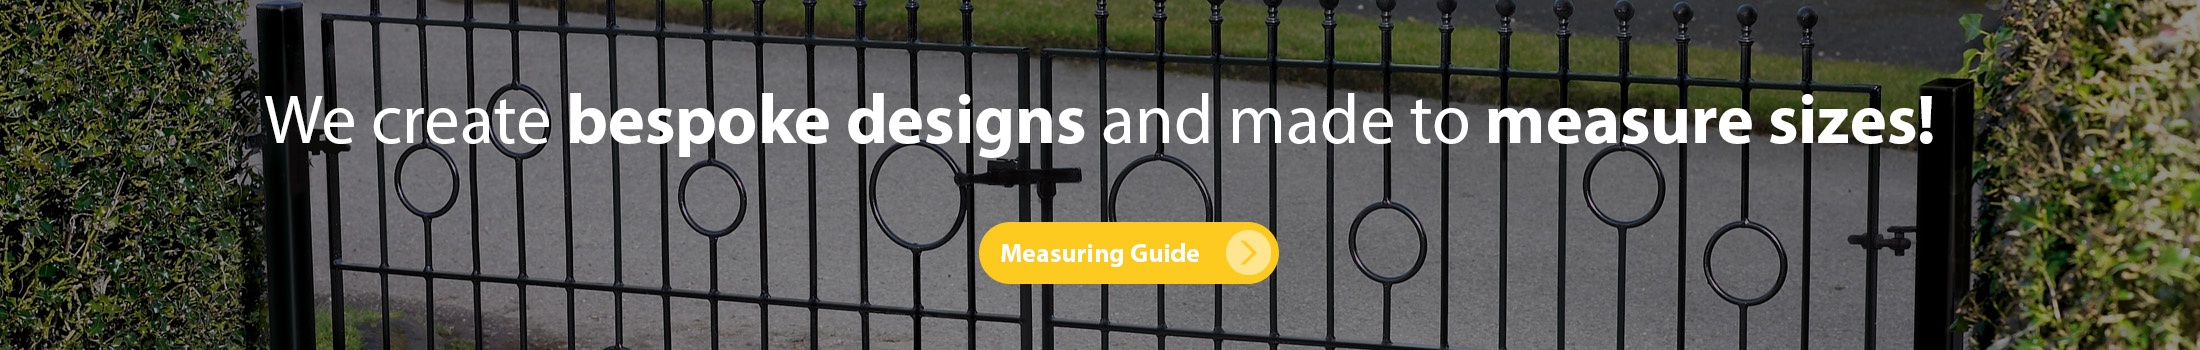 Click Here to View the Measuring Guide